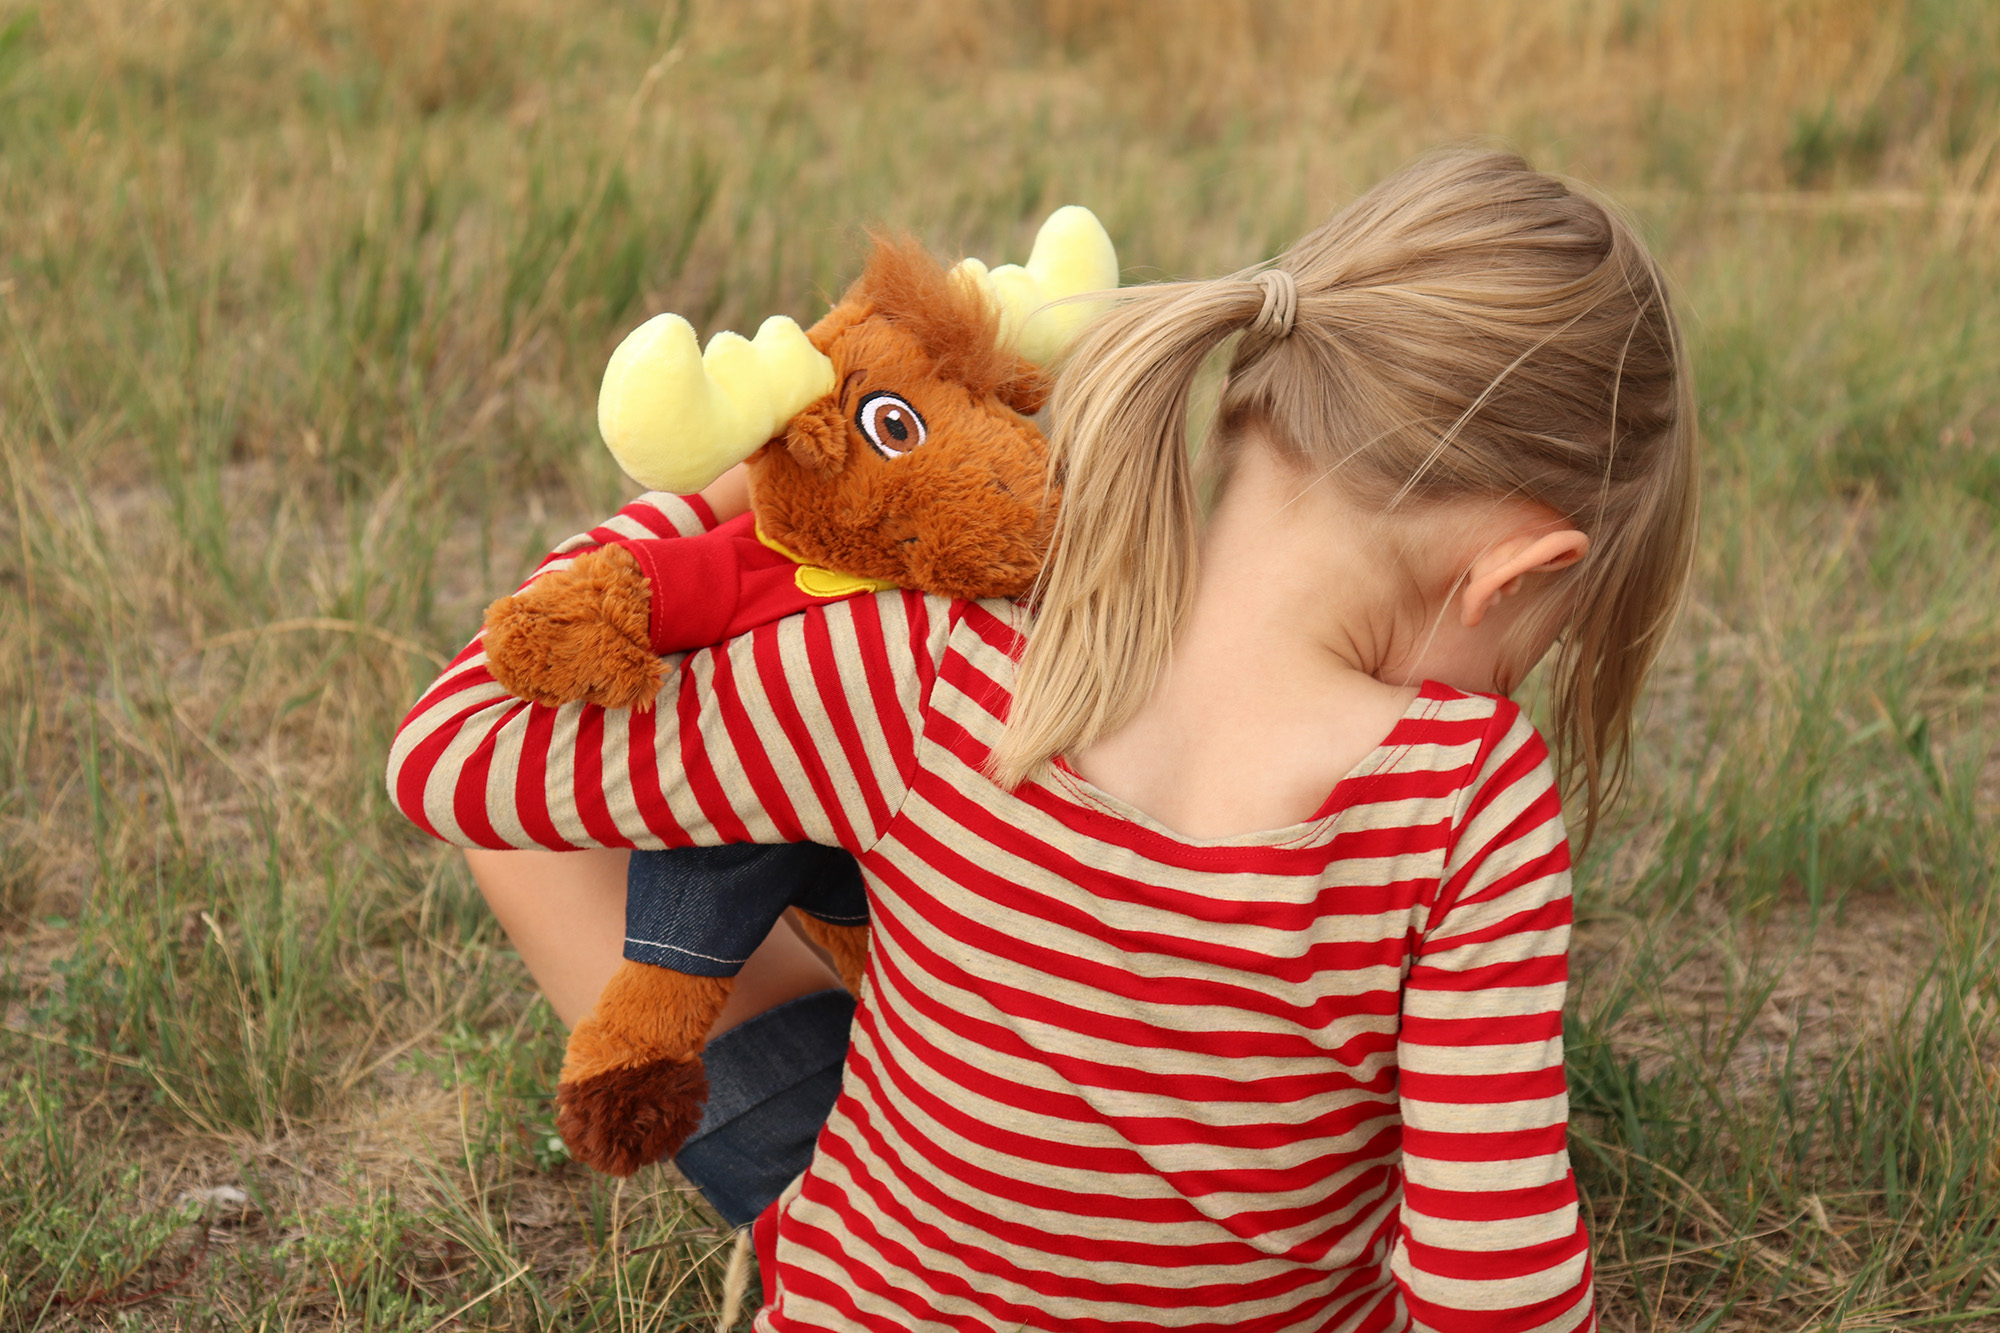 The Tommy Moose plush went through a character design refinement to help kids in times of crisis. 